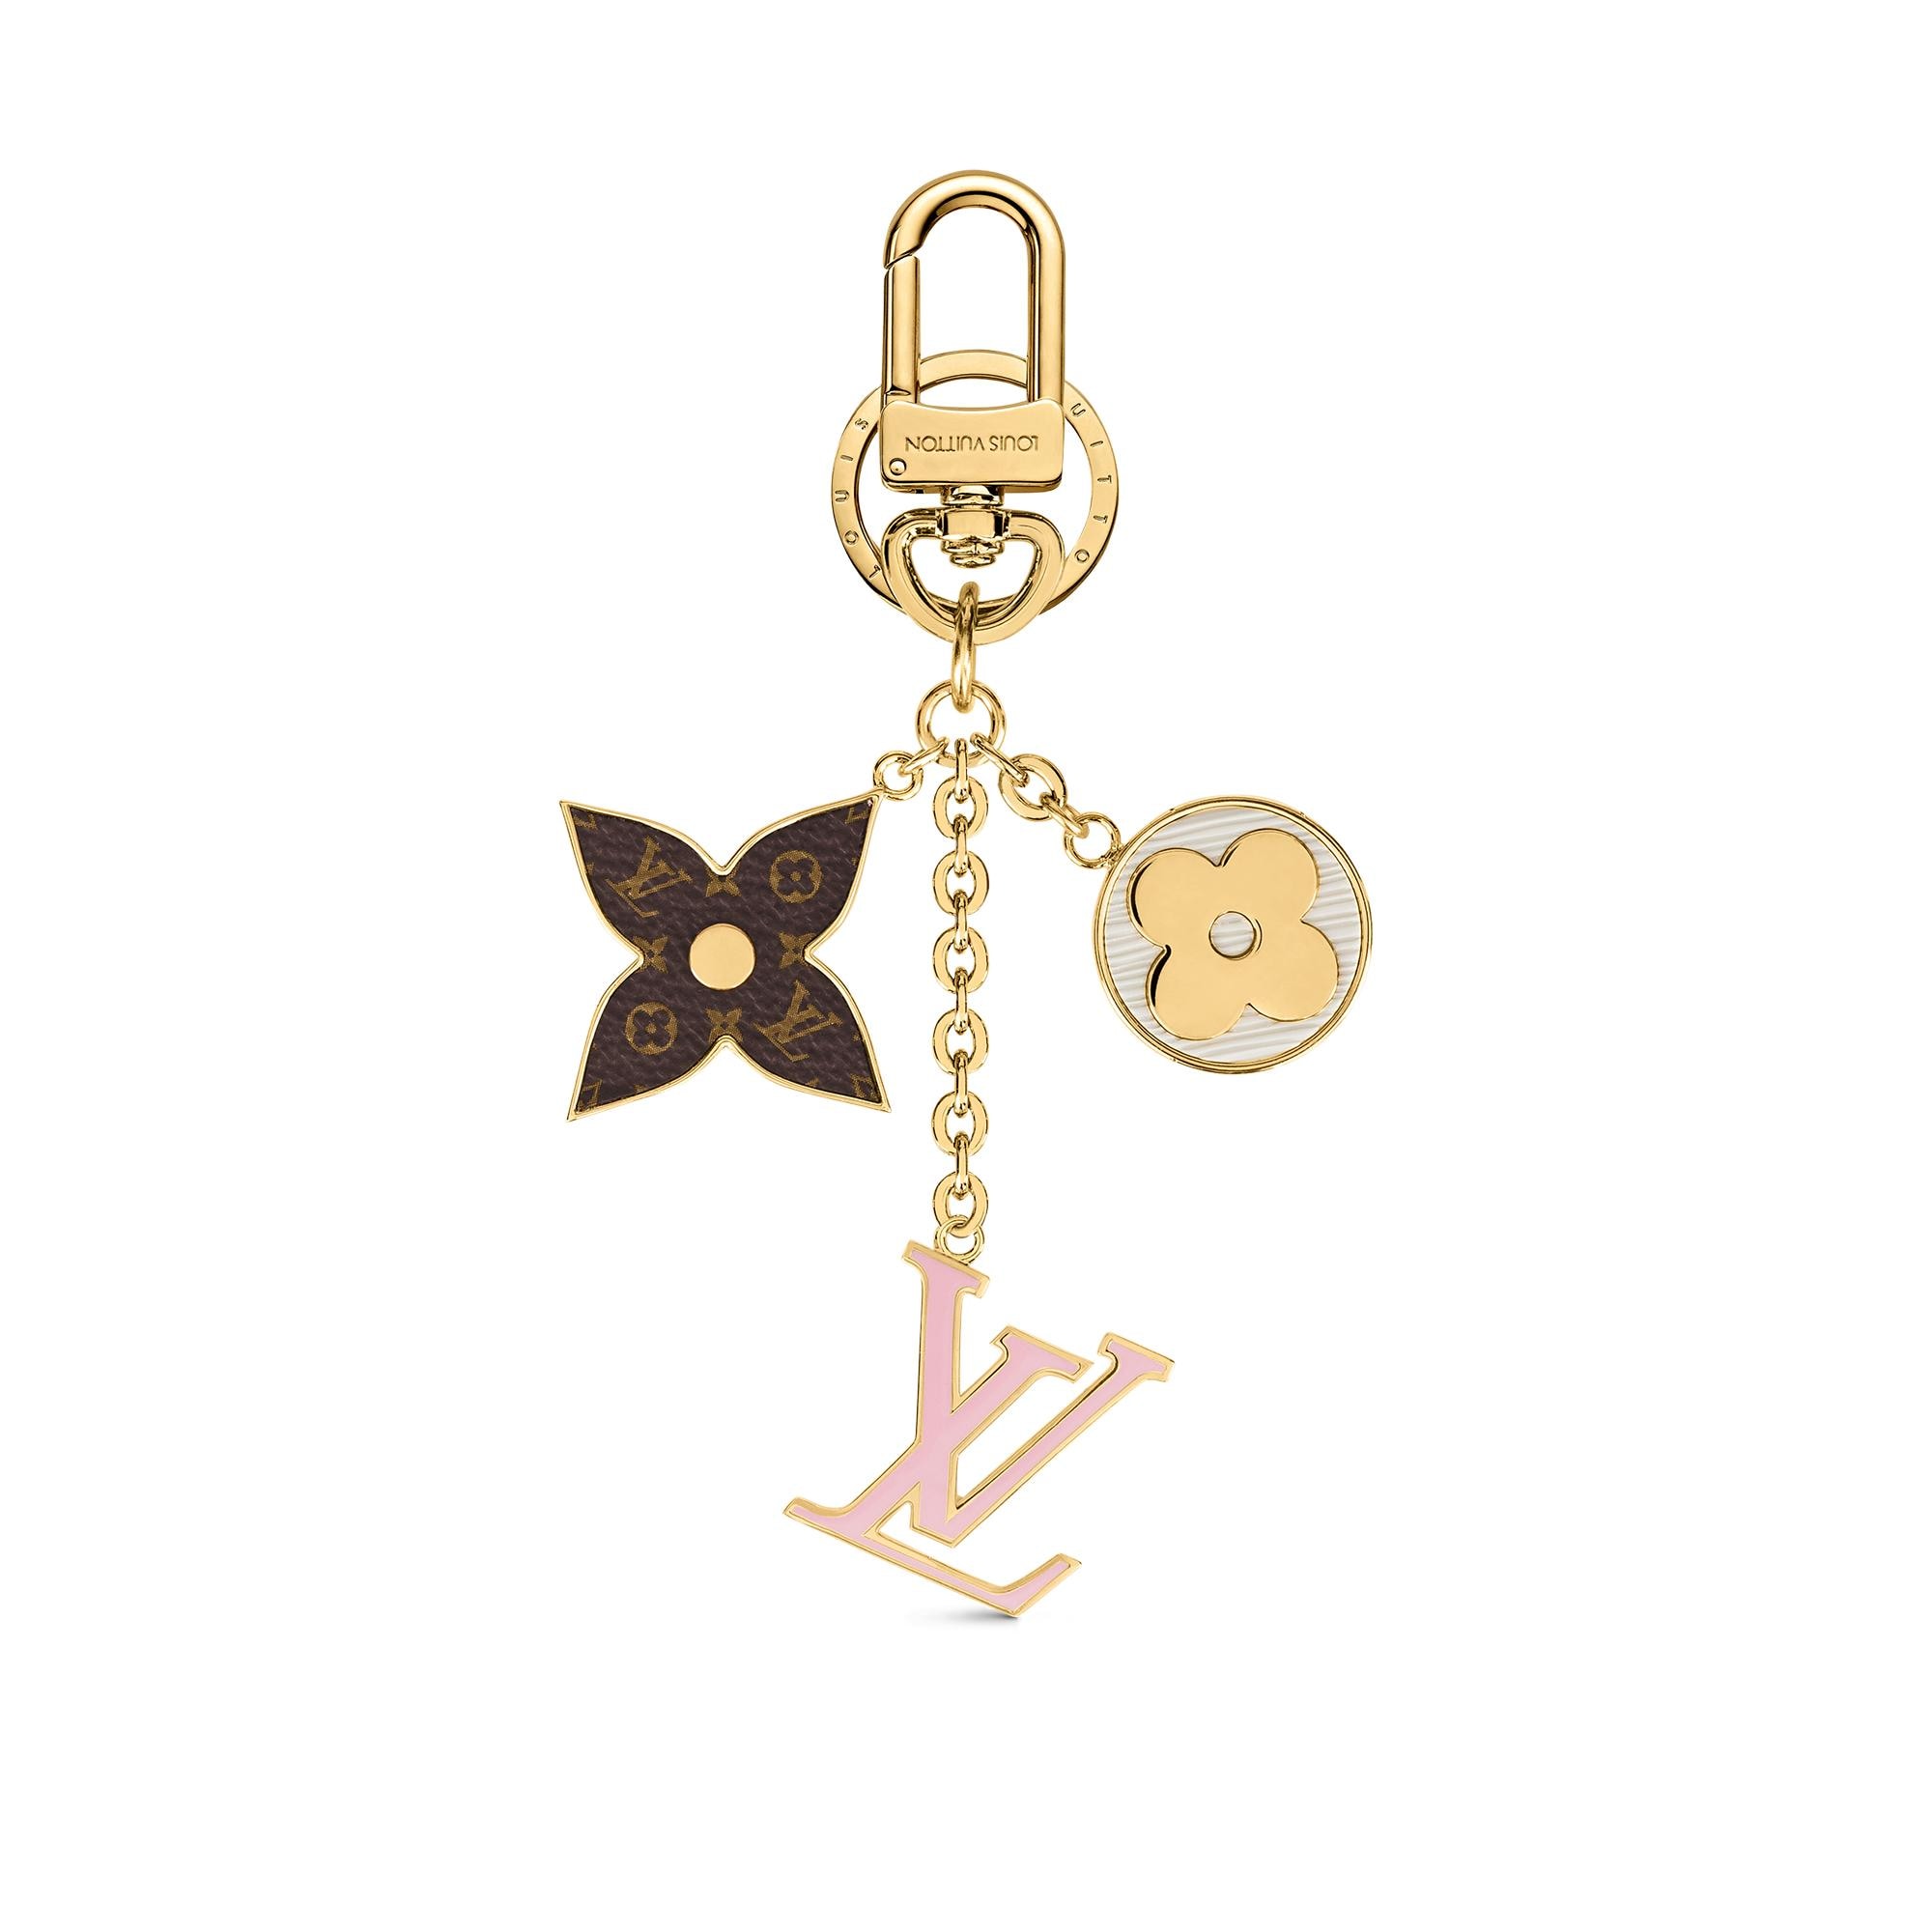 Louis Vuitton Spring Street Bag Charm and Key Holder in Brown – Accessories M69008